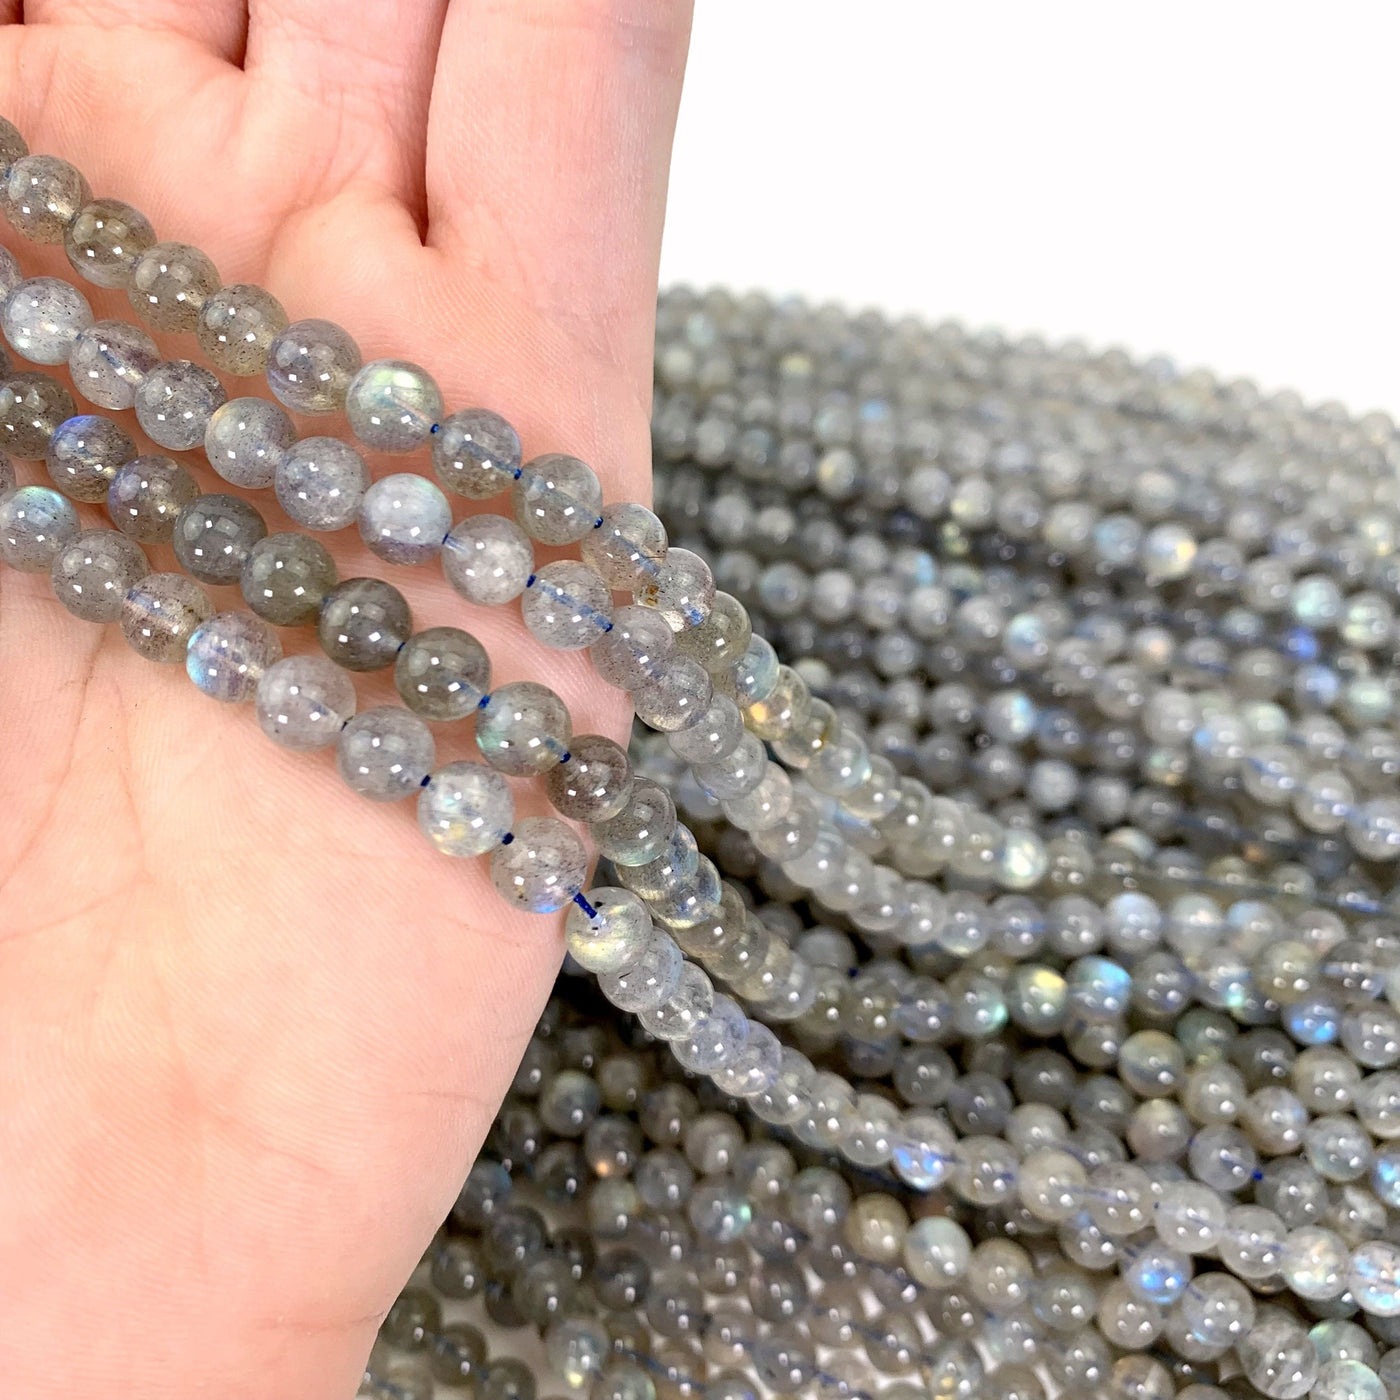 labradorite beads in hand with more labradorite beads in background